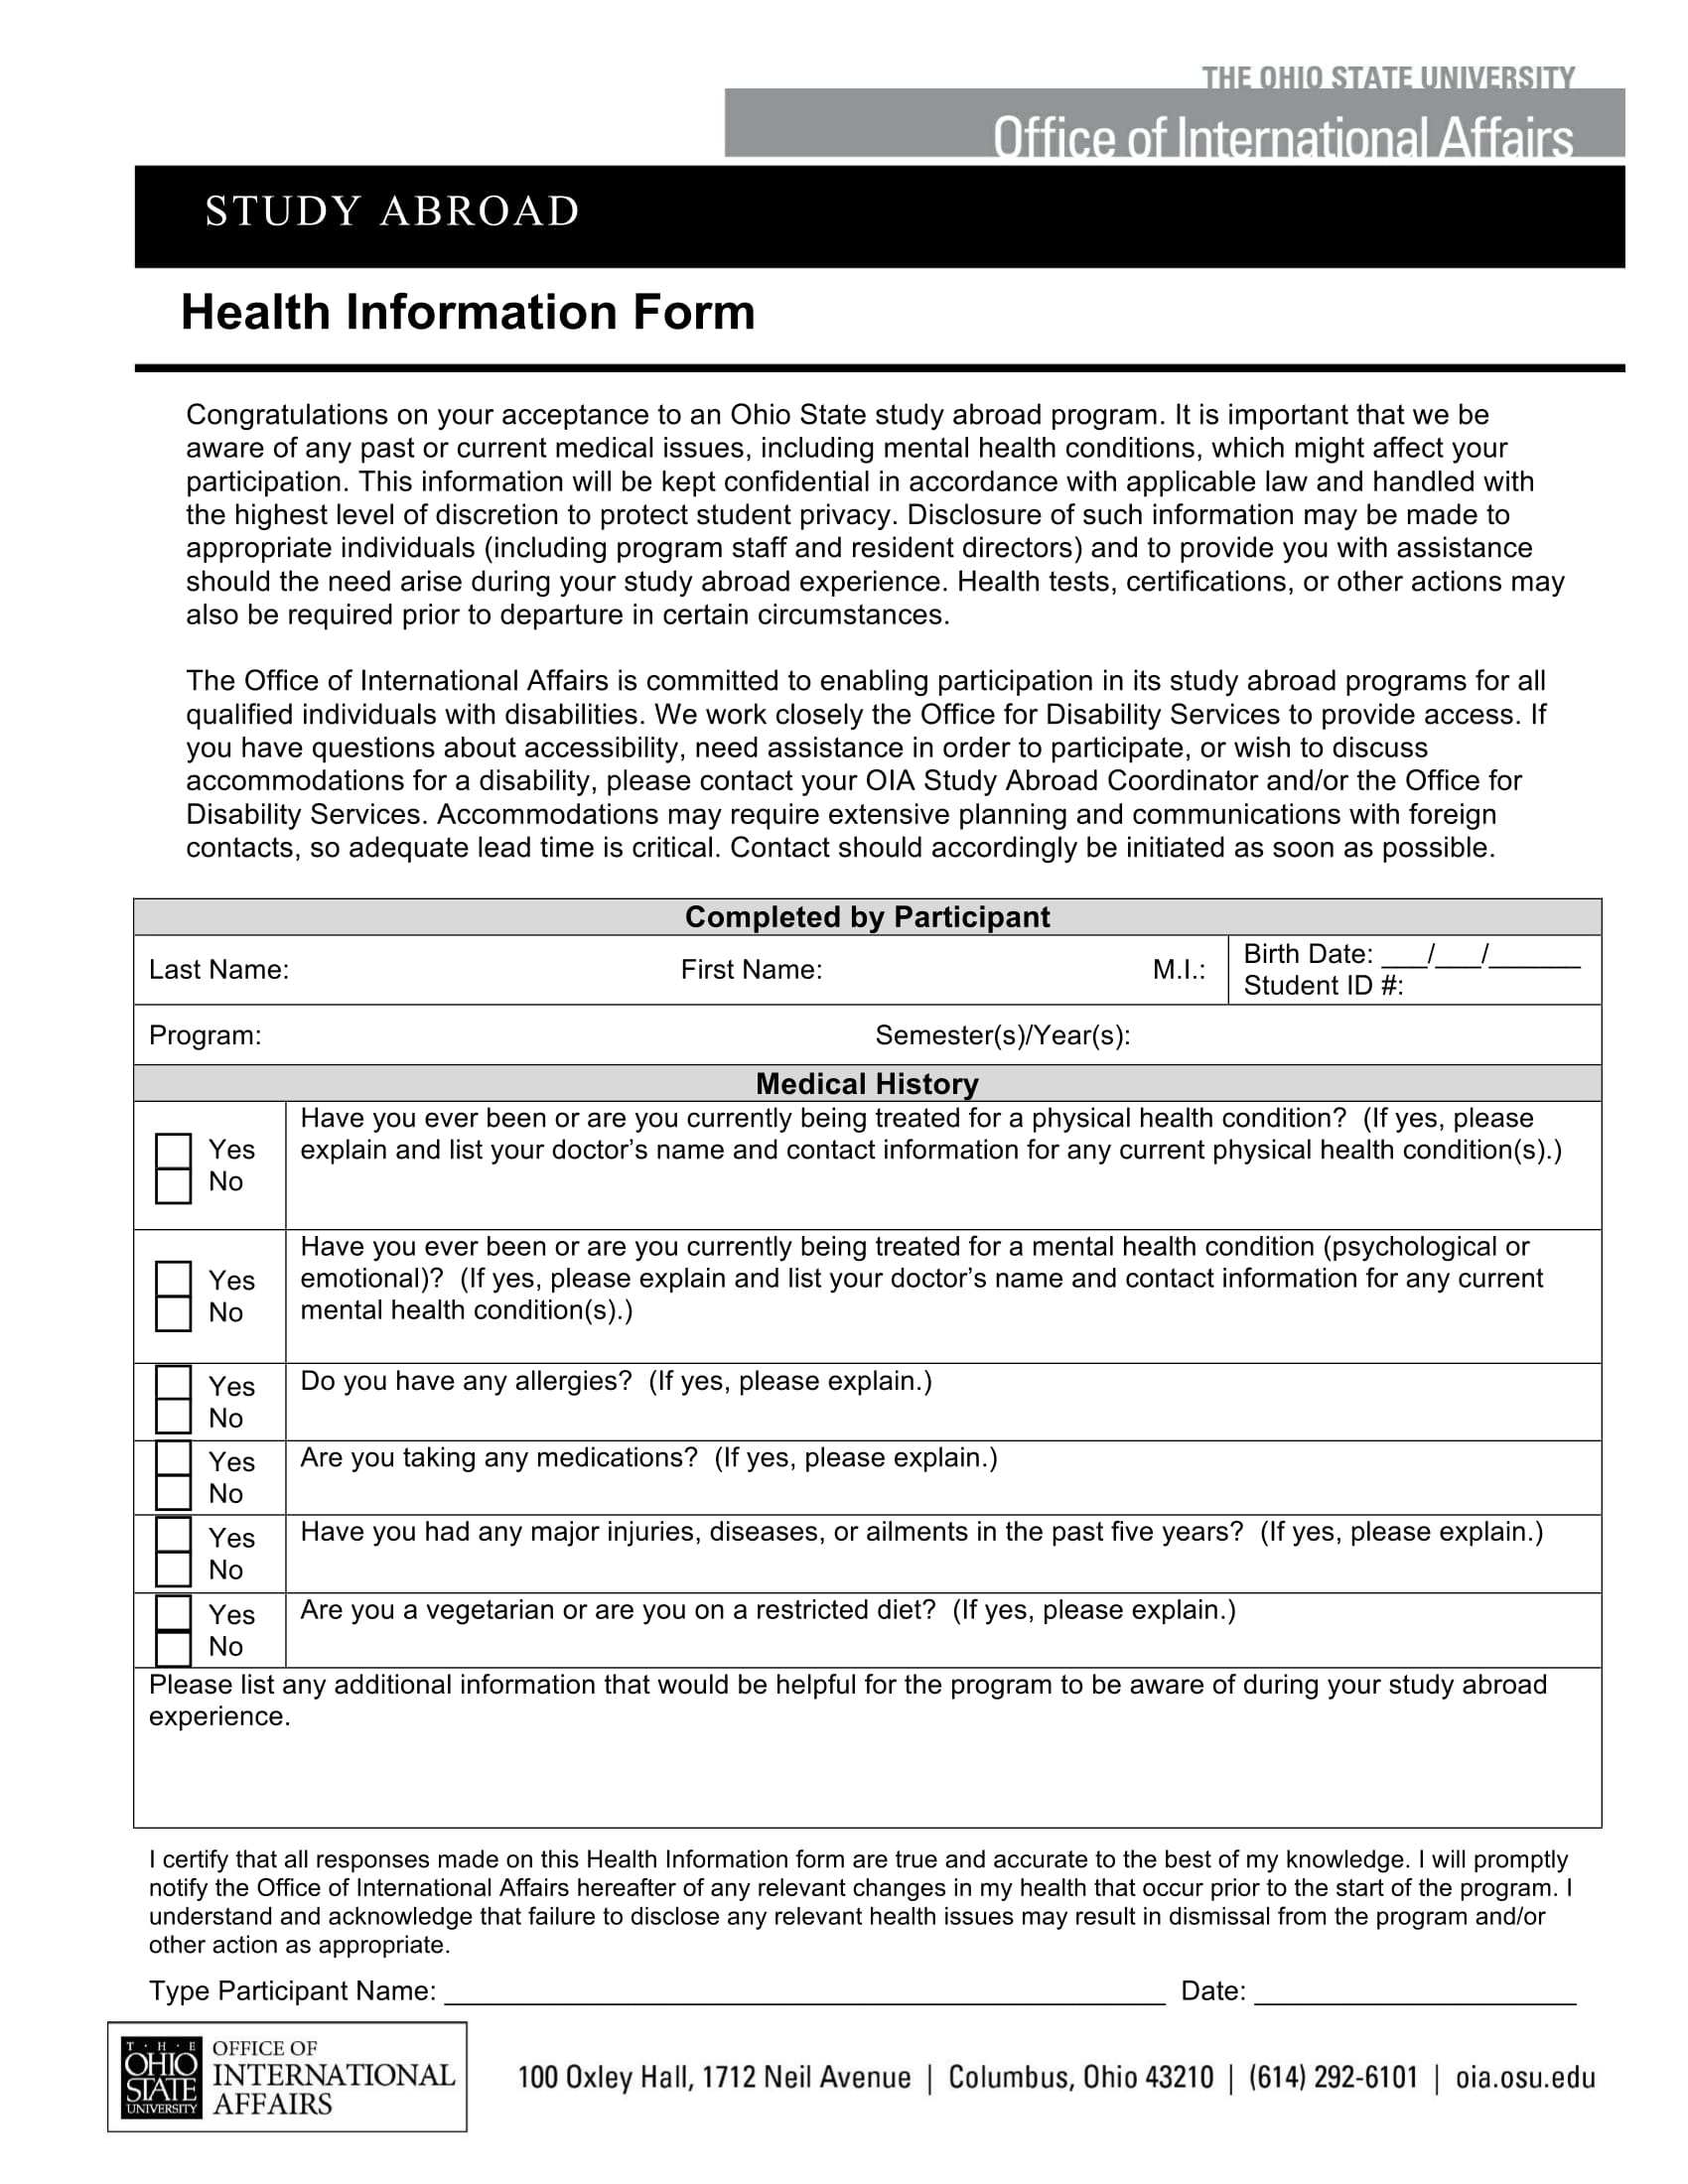 fillable health information form 1